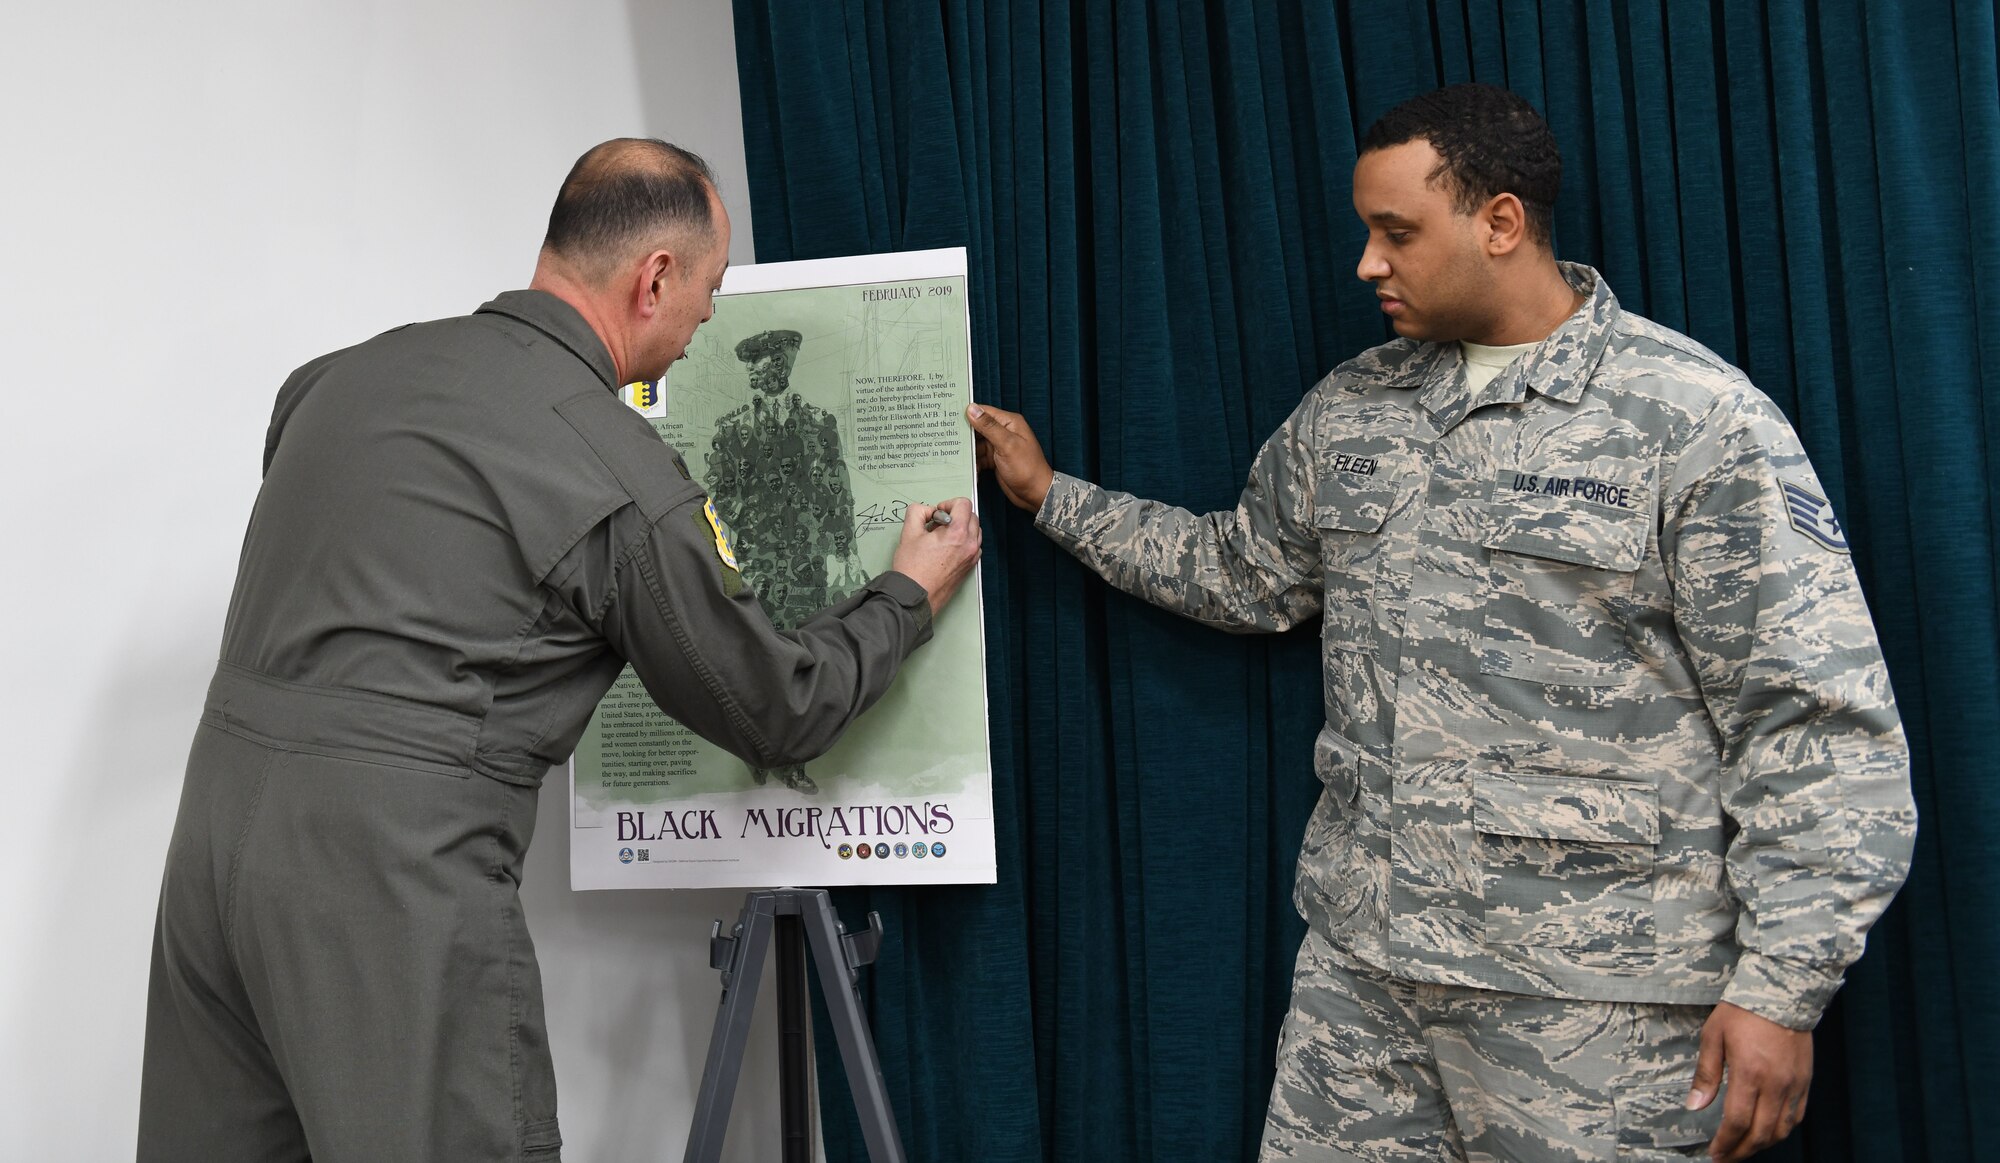 Col. John Edwards, the 28th Bomb Wing commander, signs the African American History Month proclamation alongside Staff Sgt. Andrew Fileen, the 28th Force Support Squadron relocations noncommissioned officer in charge, at Ellsworth Air Force Base, S.D., Feb. 14, 2019. The theme of this year’s proclamation was Black Migrations. (U.S. Air Force photo by Airman 1st Class Christina Bennett)